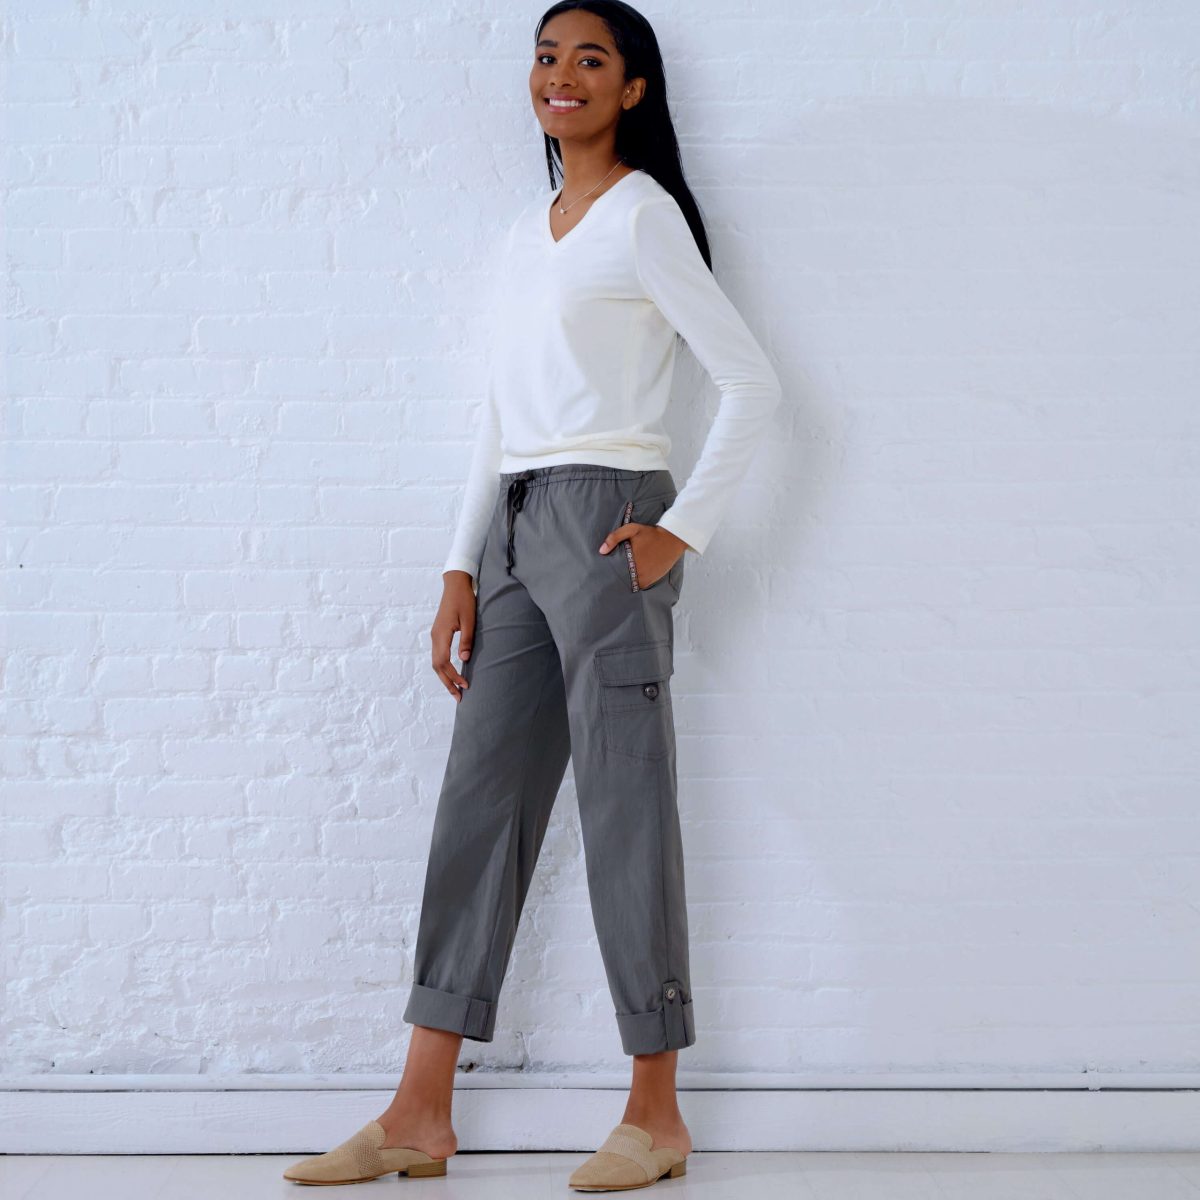 New Look Sewing Pattern N6644 Misses' Cargo Pants and Knit Top